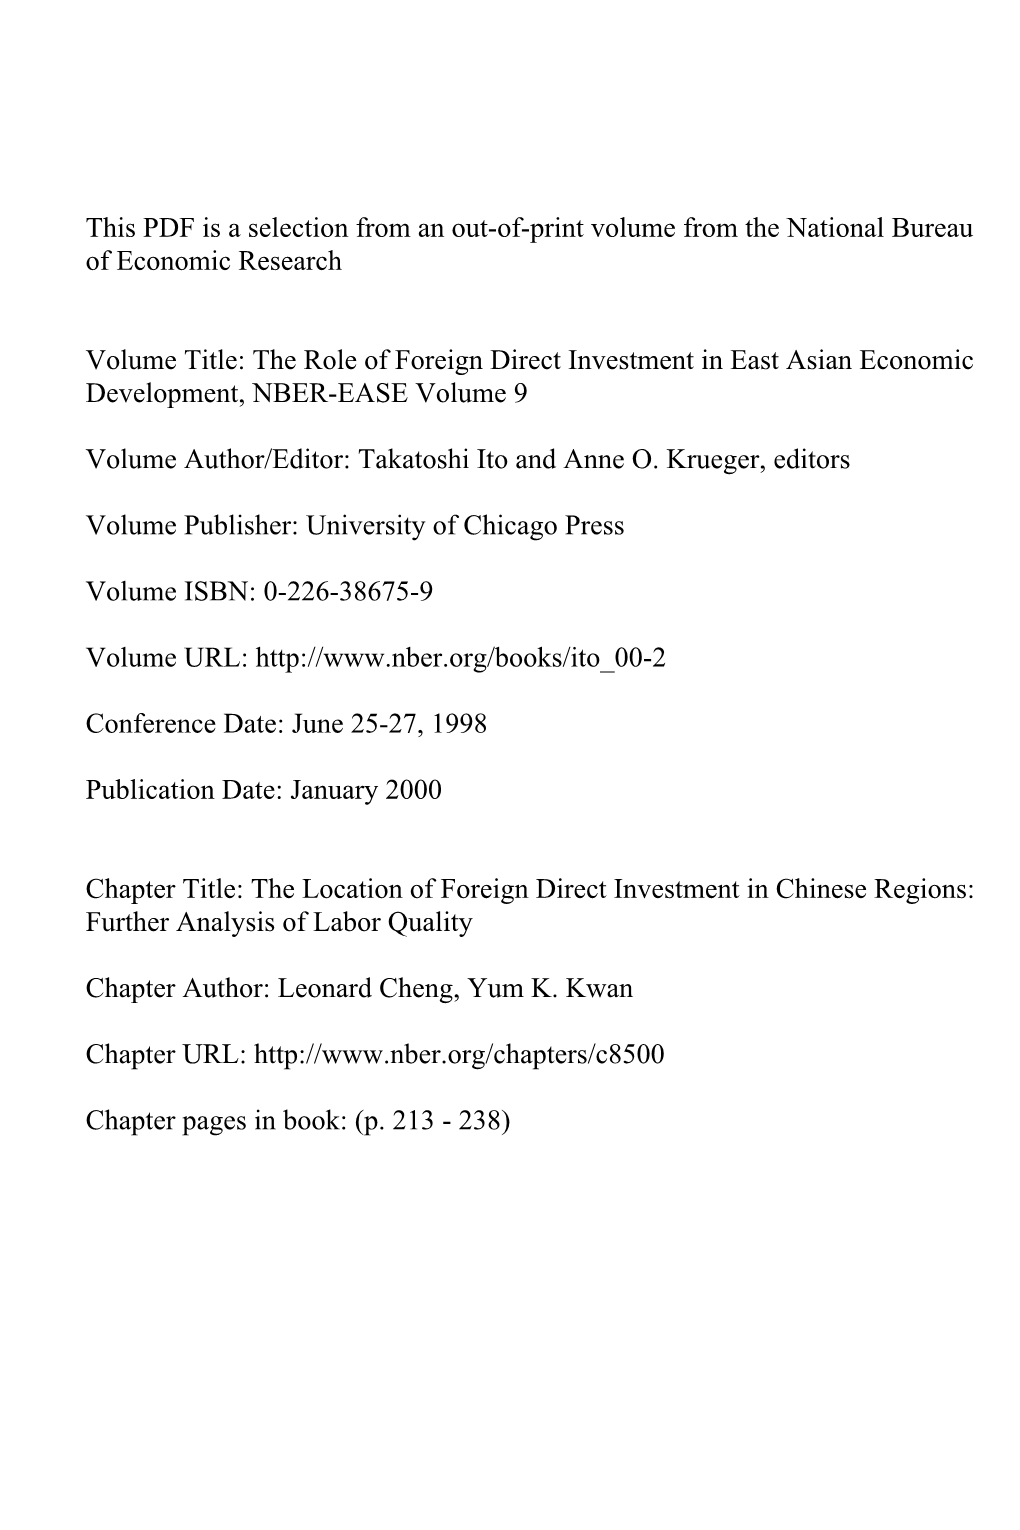 The Location of Foreign Direct Investment in Chinese Regions: Further Analysis of Labor Quality